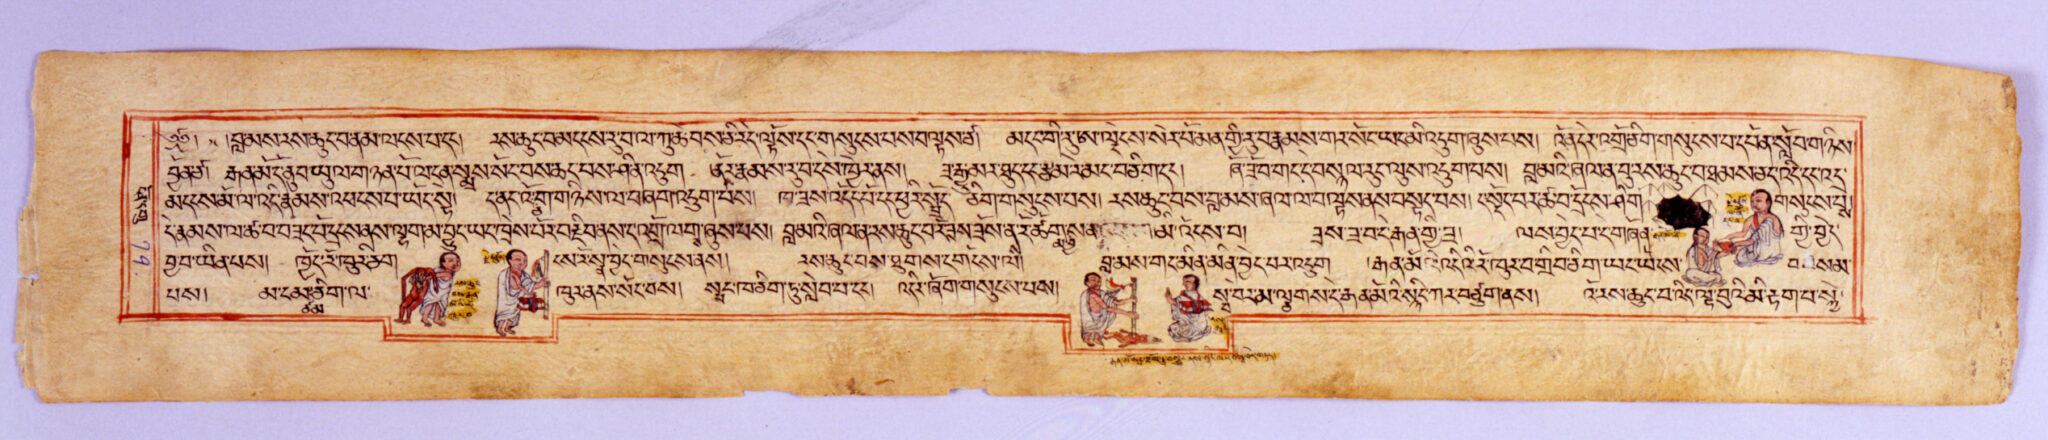 Tea-brown page with red border featuring Tibetan text and three color illuminations depicting scenes interspersed amongst text